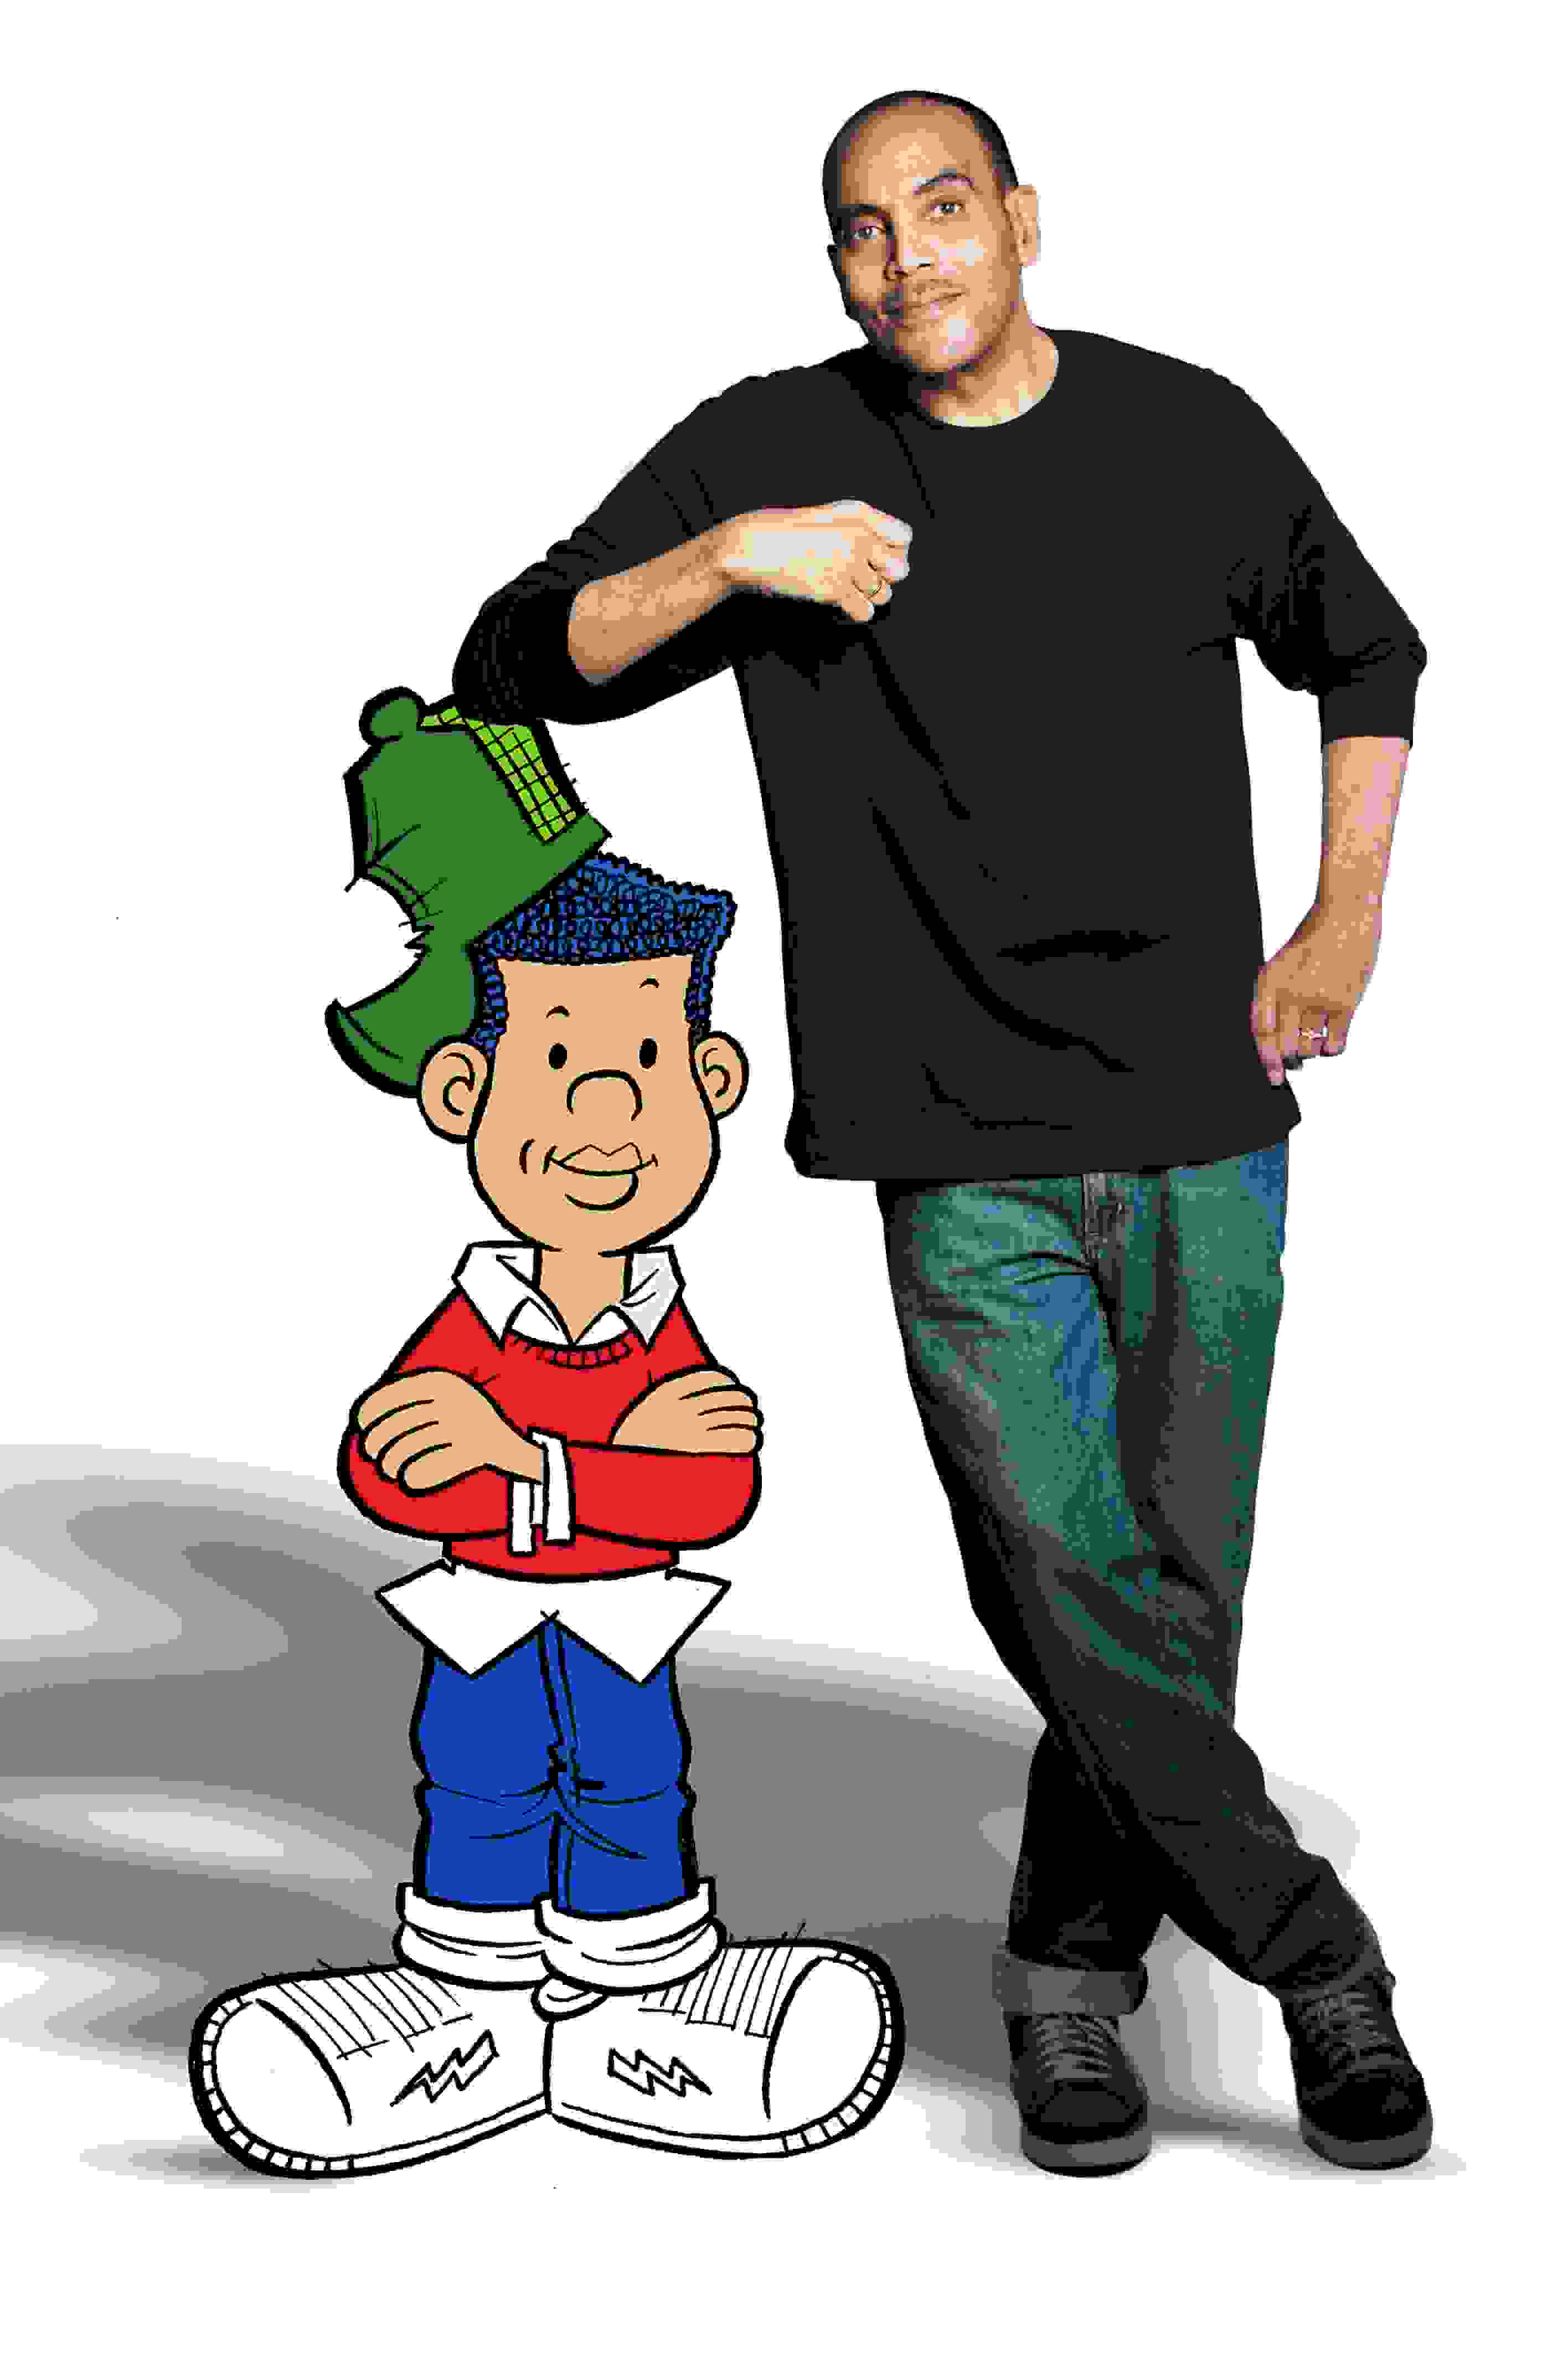 A combined photograph and illustration depicting a man leaning with his elbow propped on the baseball hat of a cartoon character.